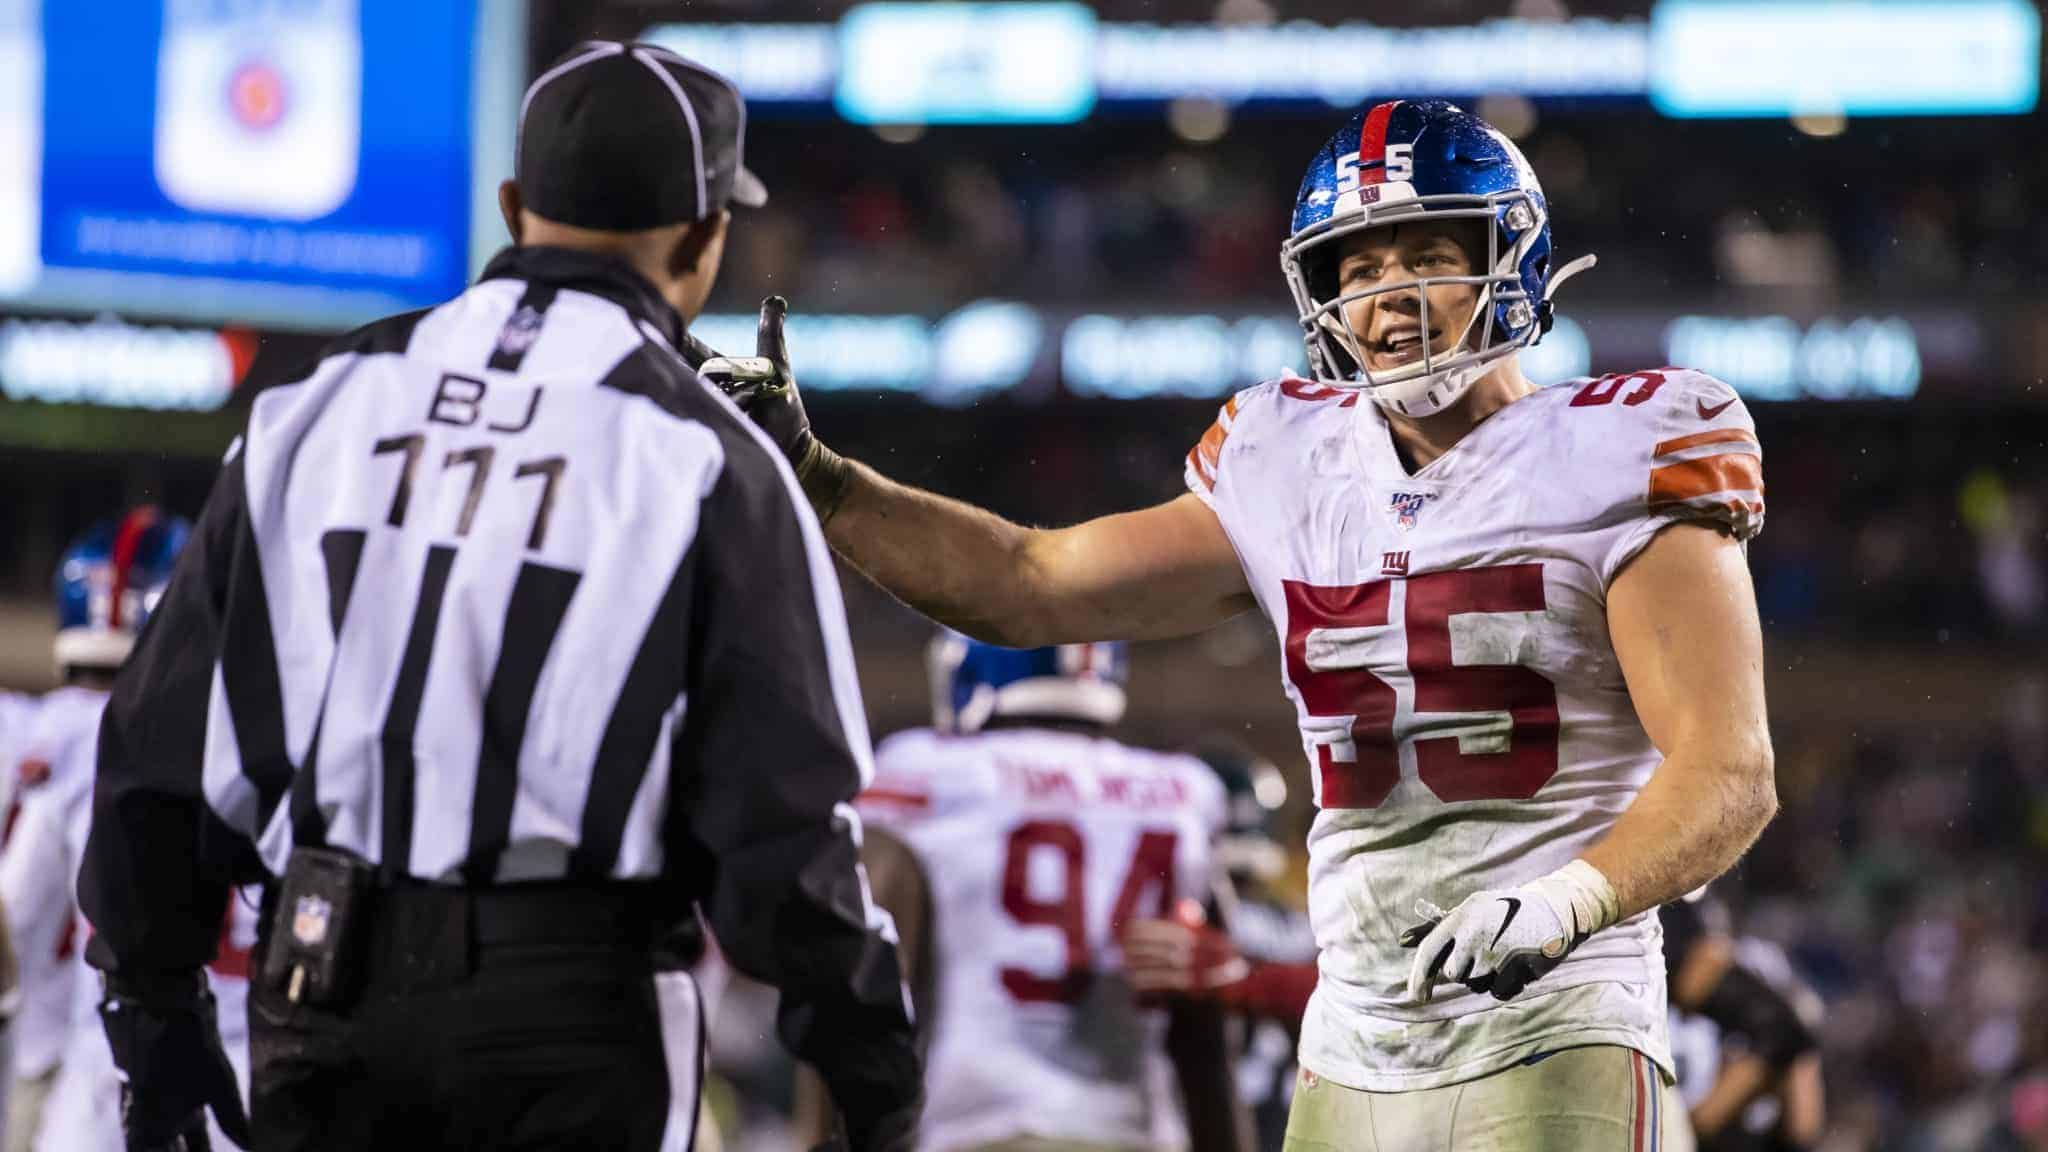 PHILADELPHIA, PA - DECEMBER 09: David Mayo #55 of the New York Giants argues a no call with back judge Terrence Miles #111 during the fourth quarter after a Philadelphia Eagles touchdown at Lincoln Financial Field on December 9, 2019 in Philadelphia, Pennsylvania. Philadelphia defeats New York in overtime 23-17.